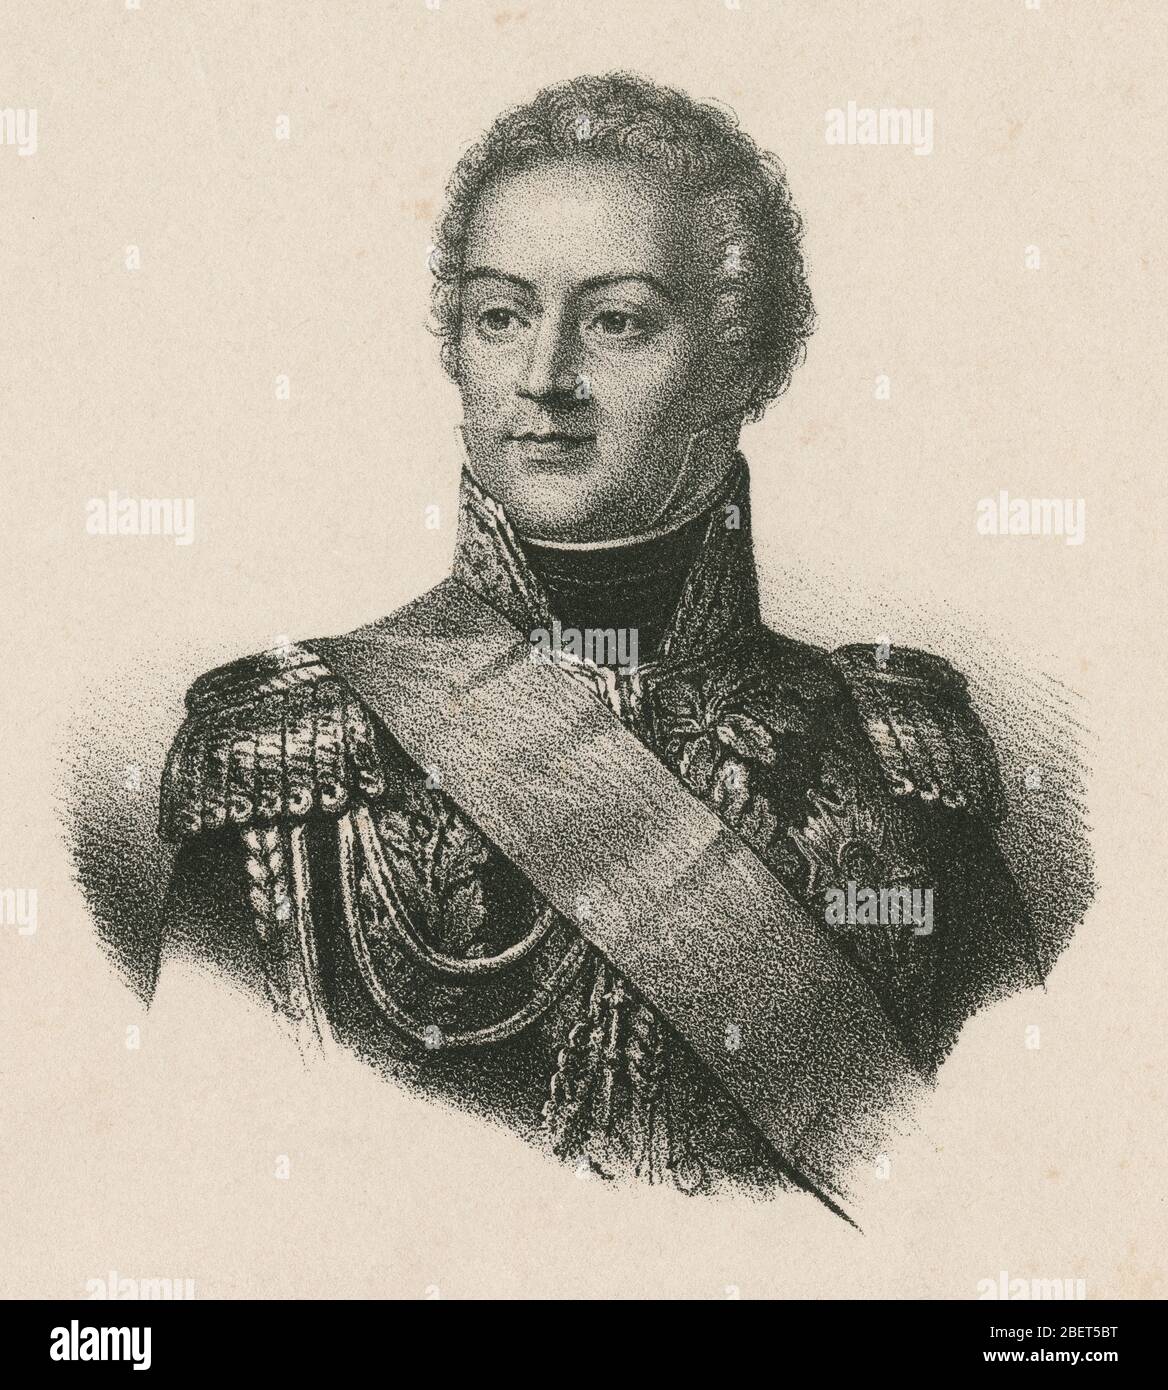 Antique engraving, Louis-Alexandre Berthier. Louis-Alexandre Berthier (1753-1815), 1st Prince of Wagram, Sovereign Prince of Neuchâtel, was a French Marshal and Vice-Constable of the Empire, and chief of staff under Napoleon. SOURCE: ORIGINAL ENGRAVING Stock Photo